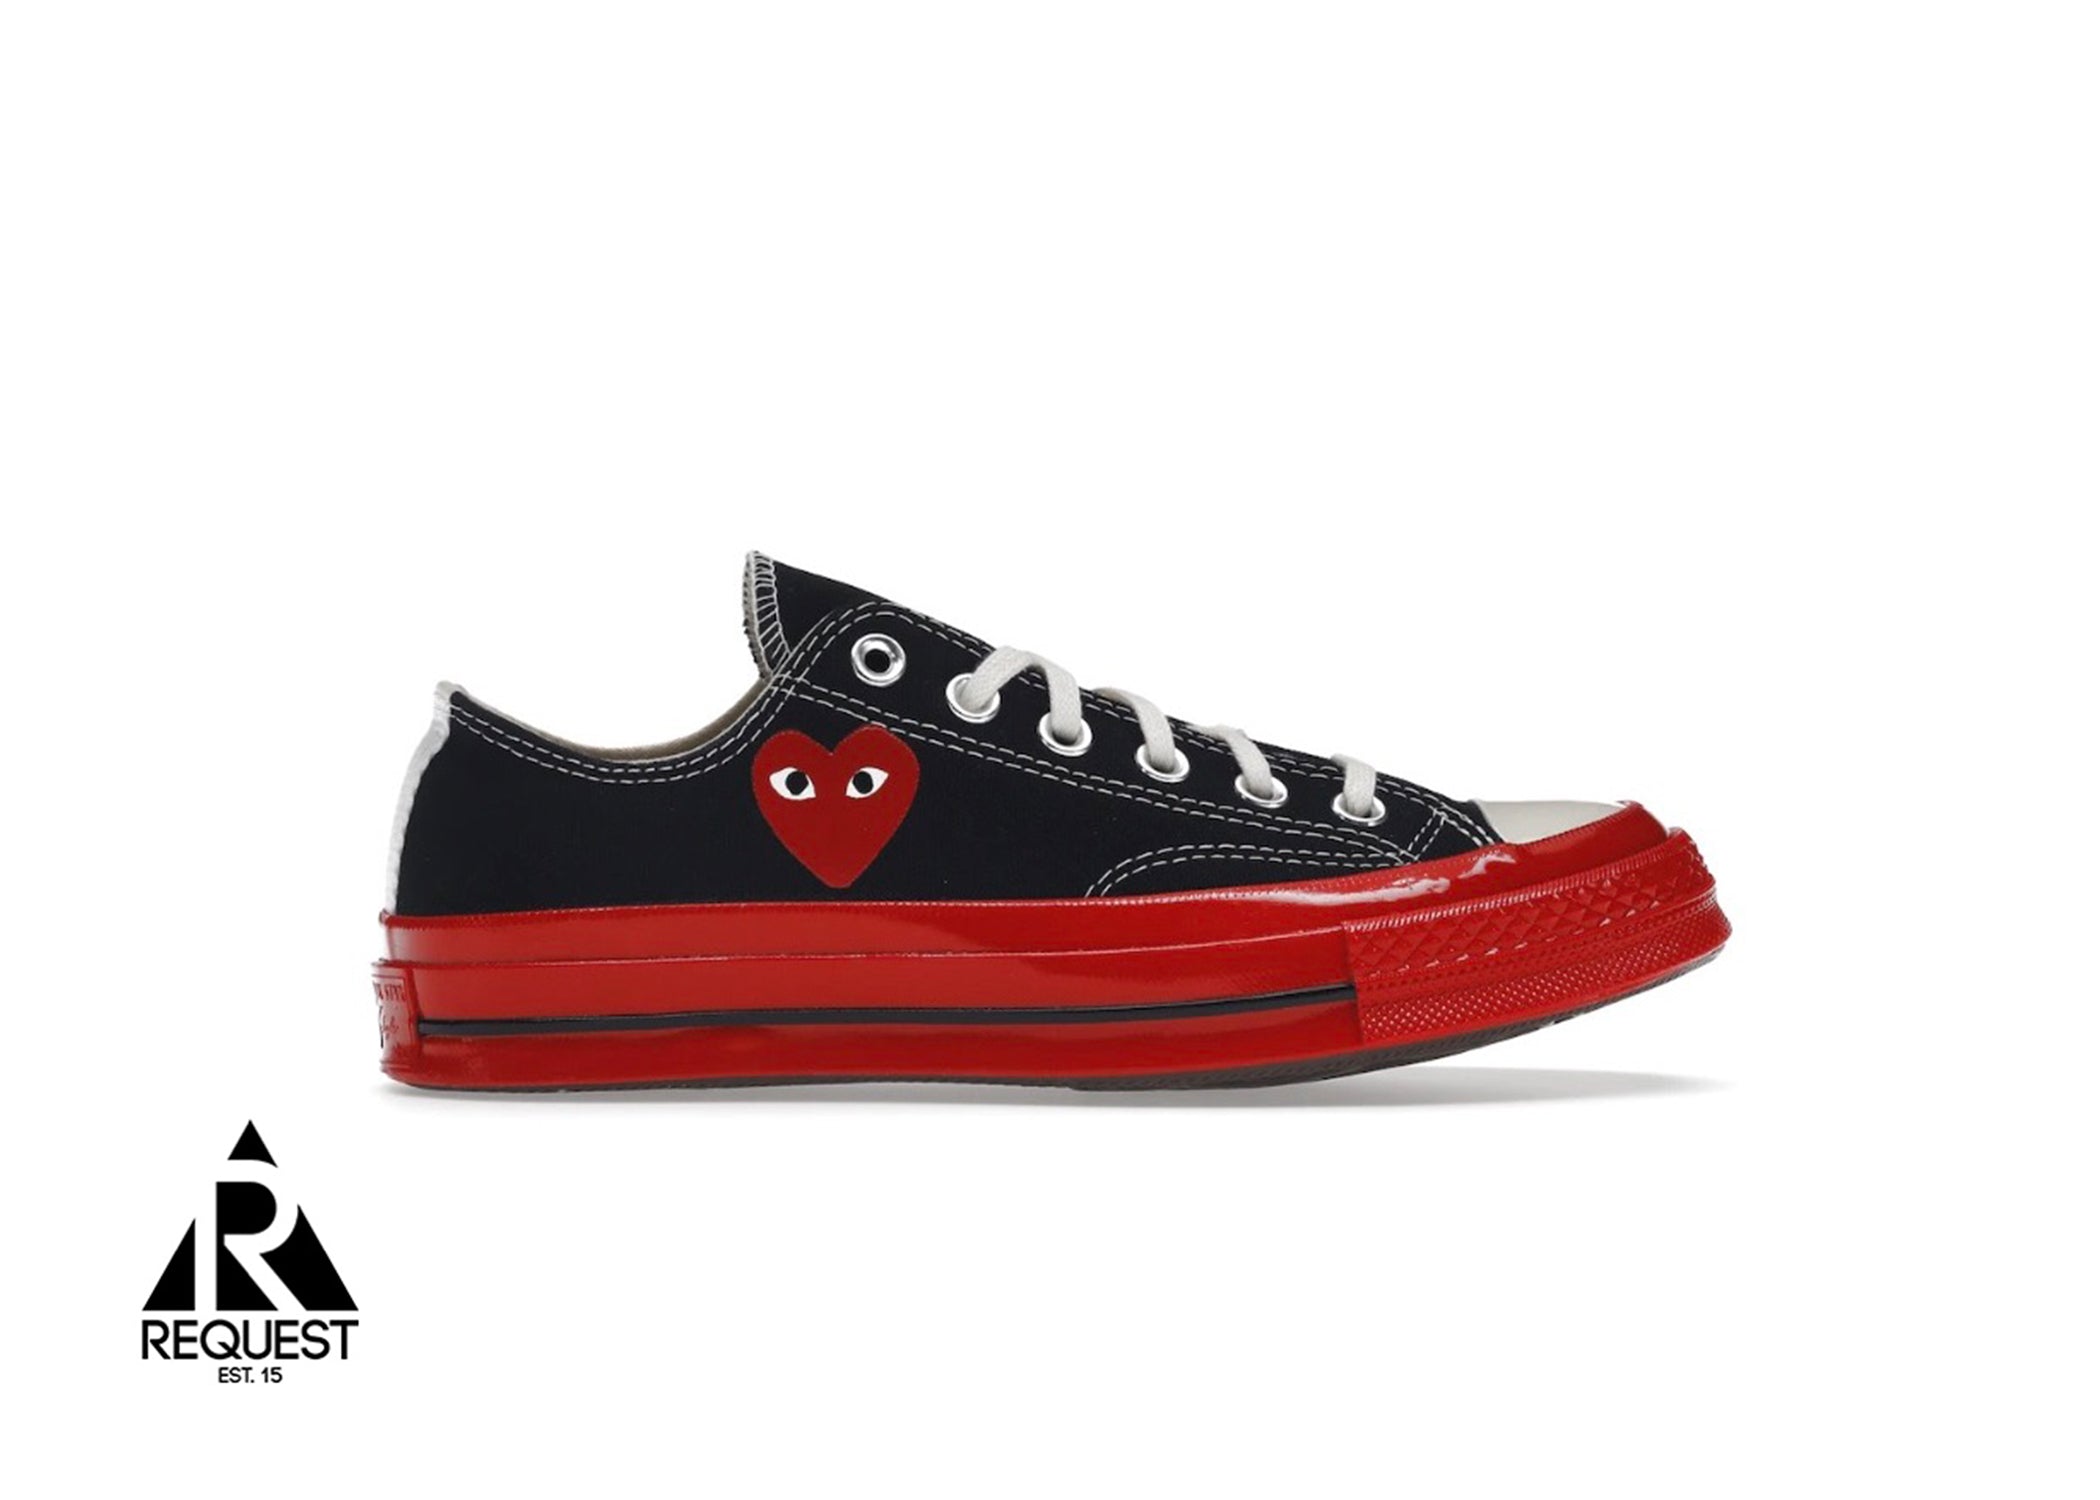 Converse Chuck Taylor All-Star 70s Ox "CDG Black Red Bottom"